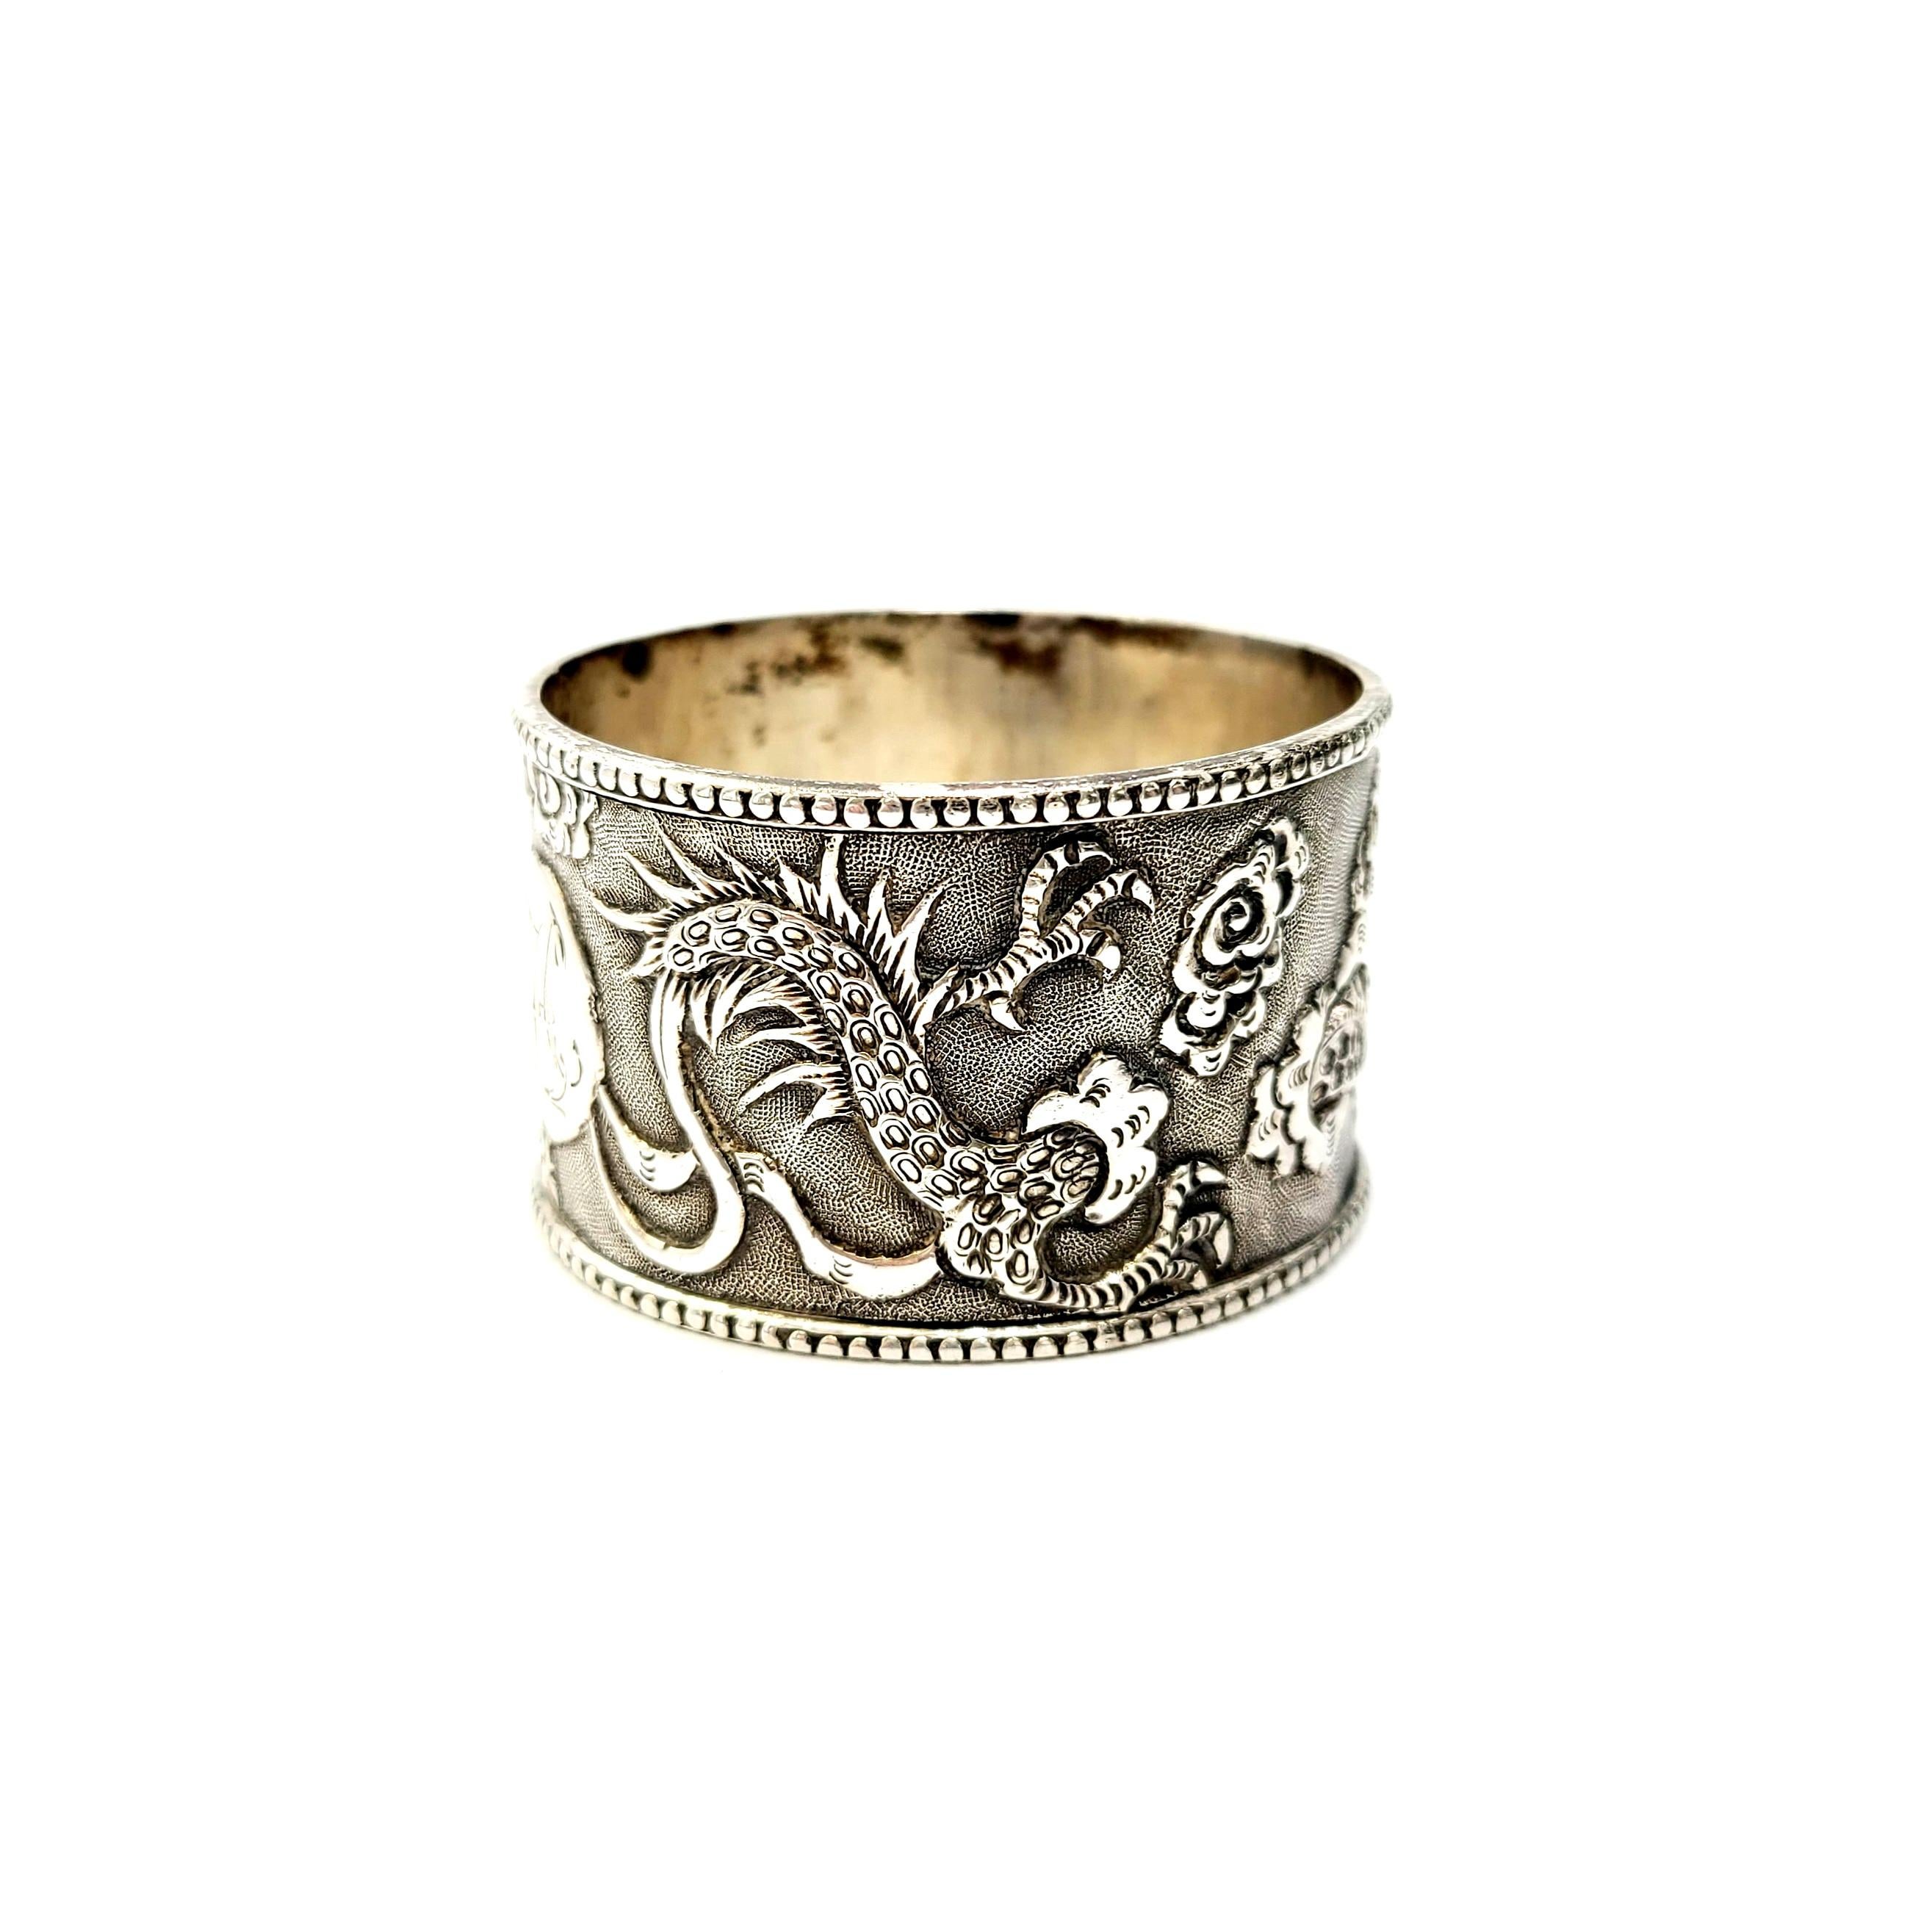 Antique Chinese export silver napkin ring.

Beautifully ornate napkin ring features intricate Chinese dragons on a textured background. Round cartouche with monogram.

Monogram appears to be AH.

Measures approx 1 1/8